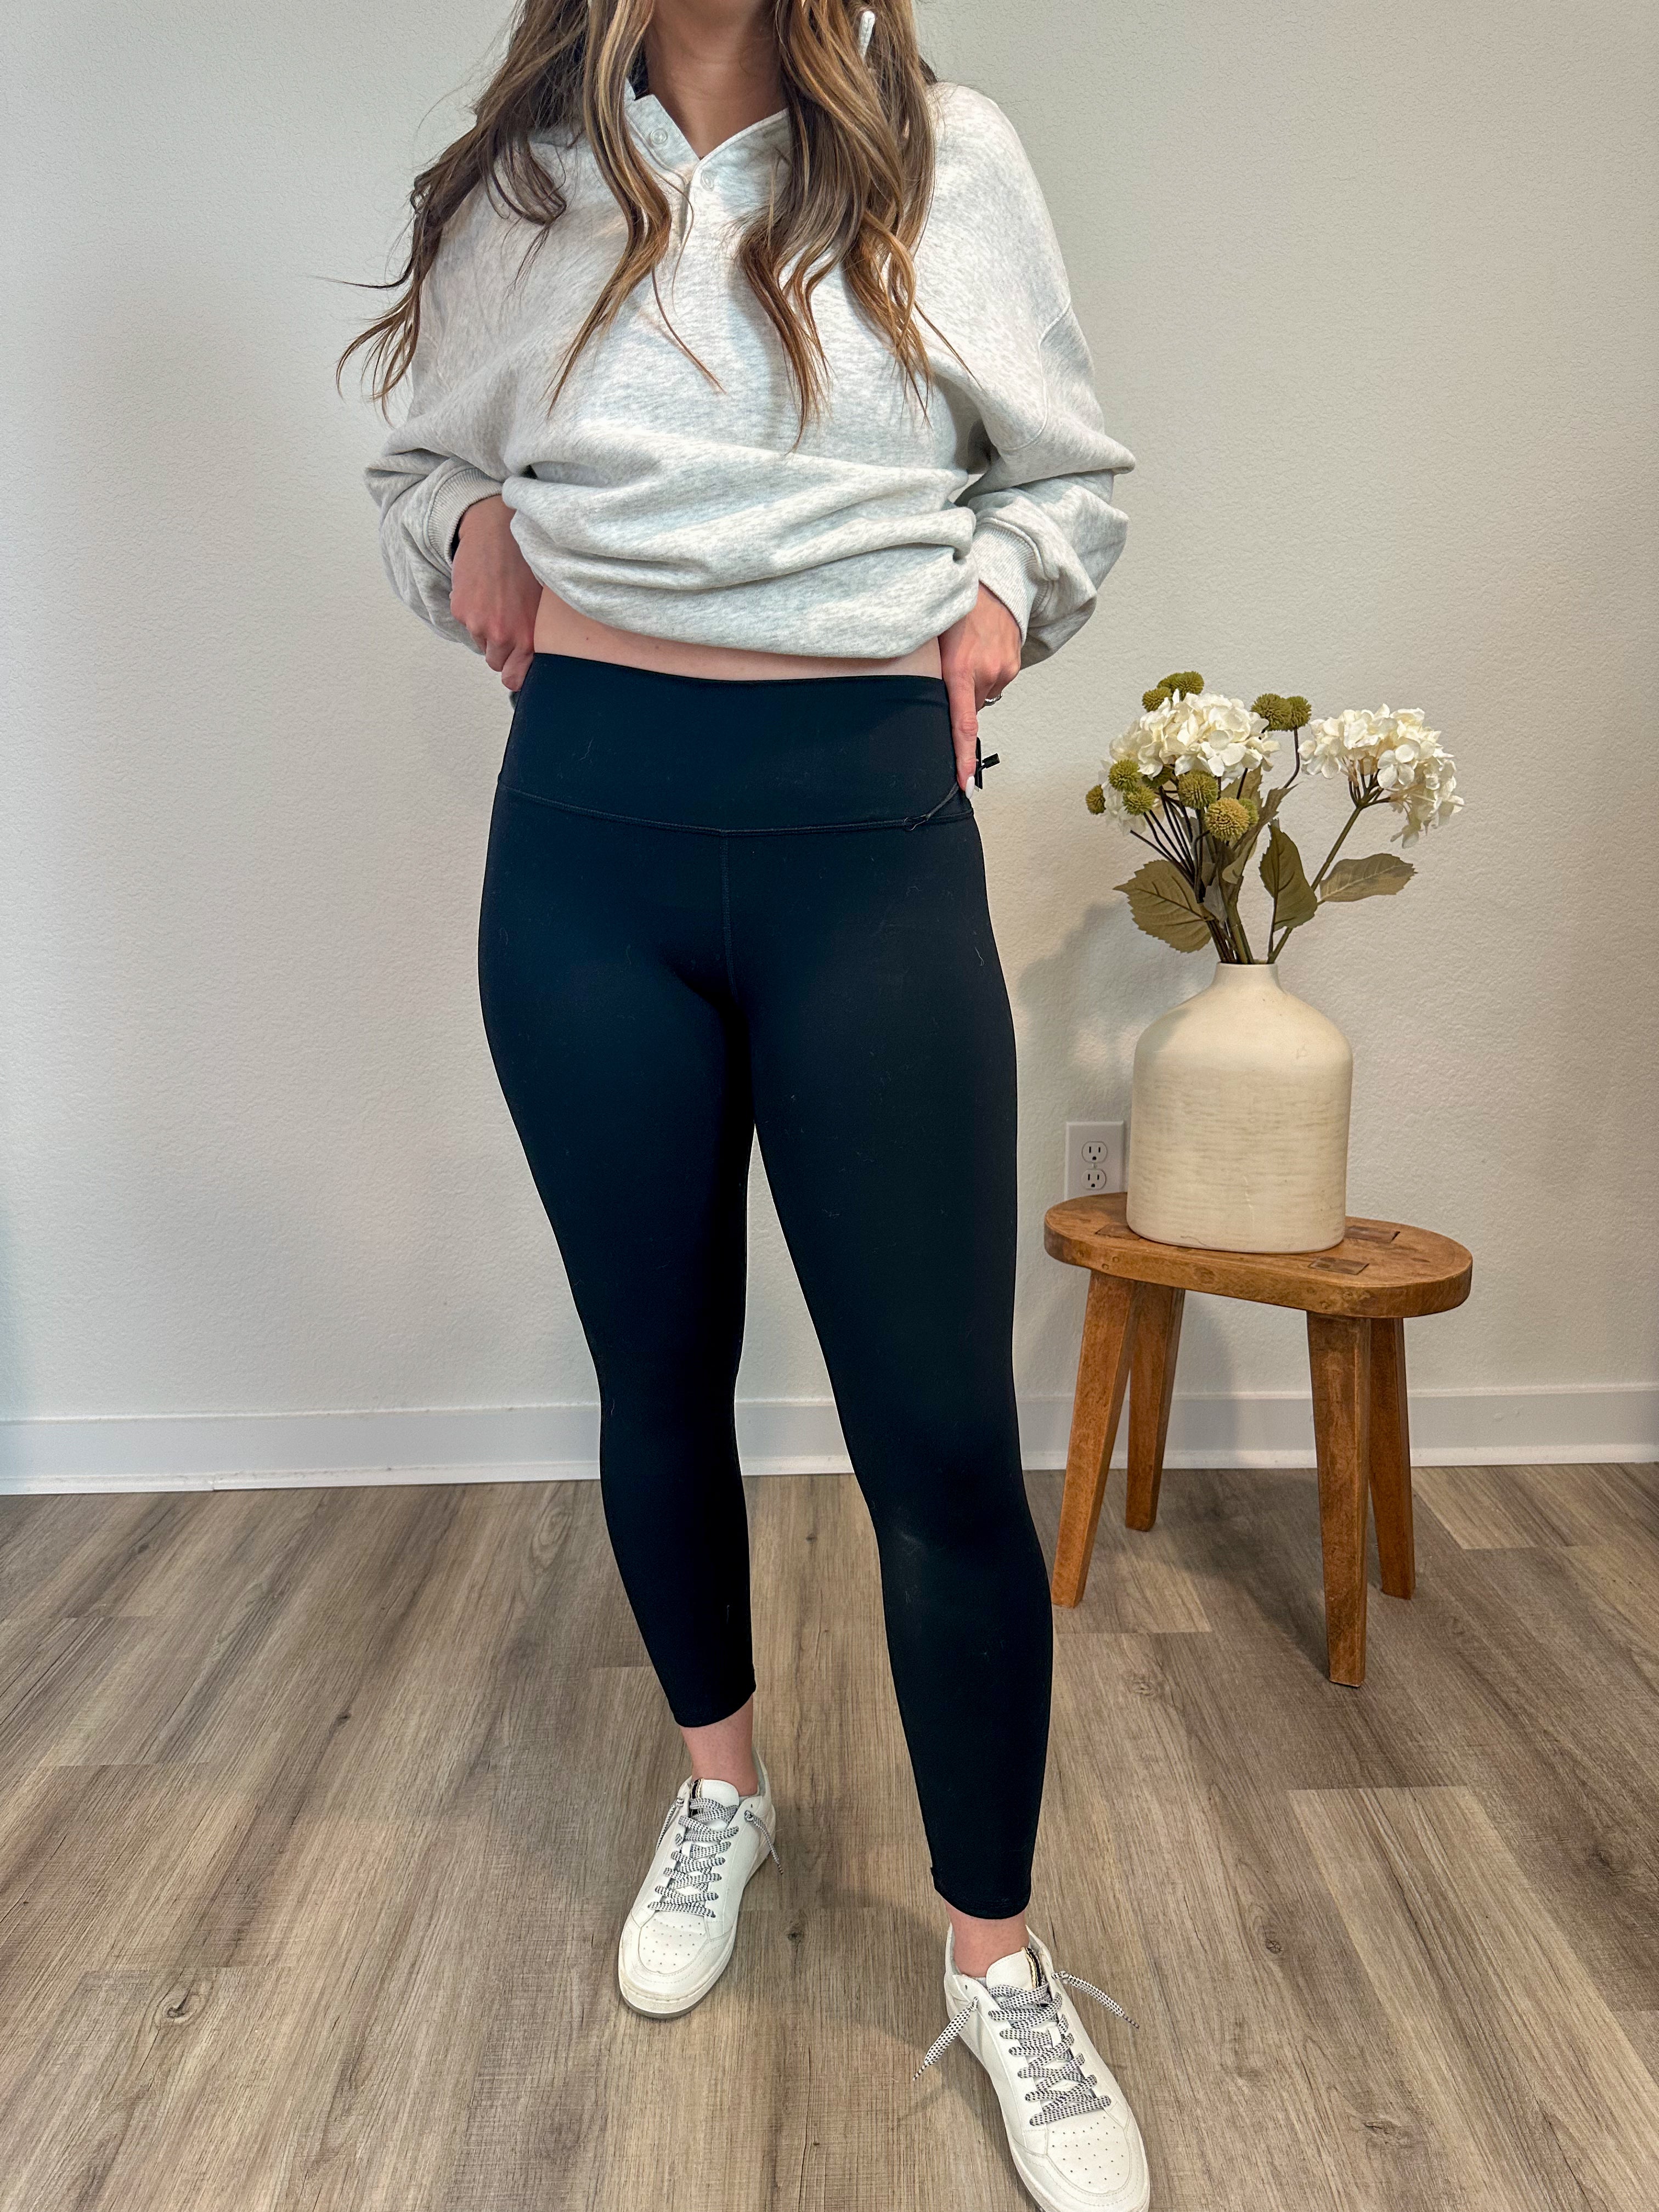 High Waisted Crossover Flare Leggings in Black – The White Pear